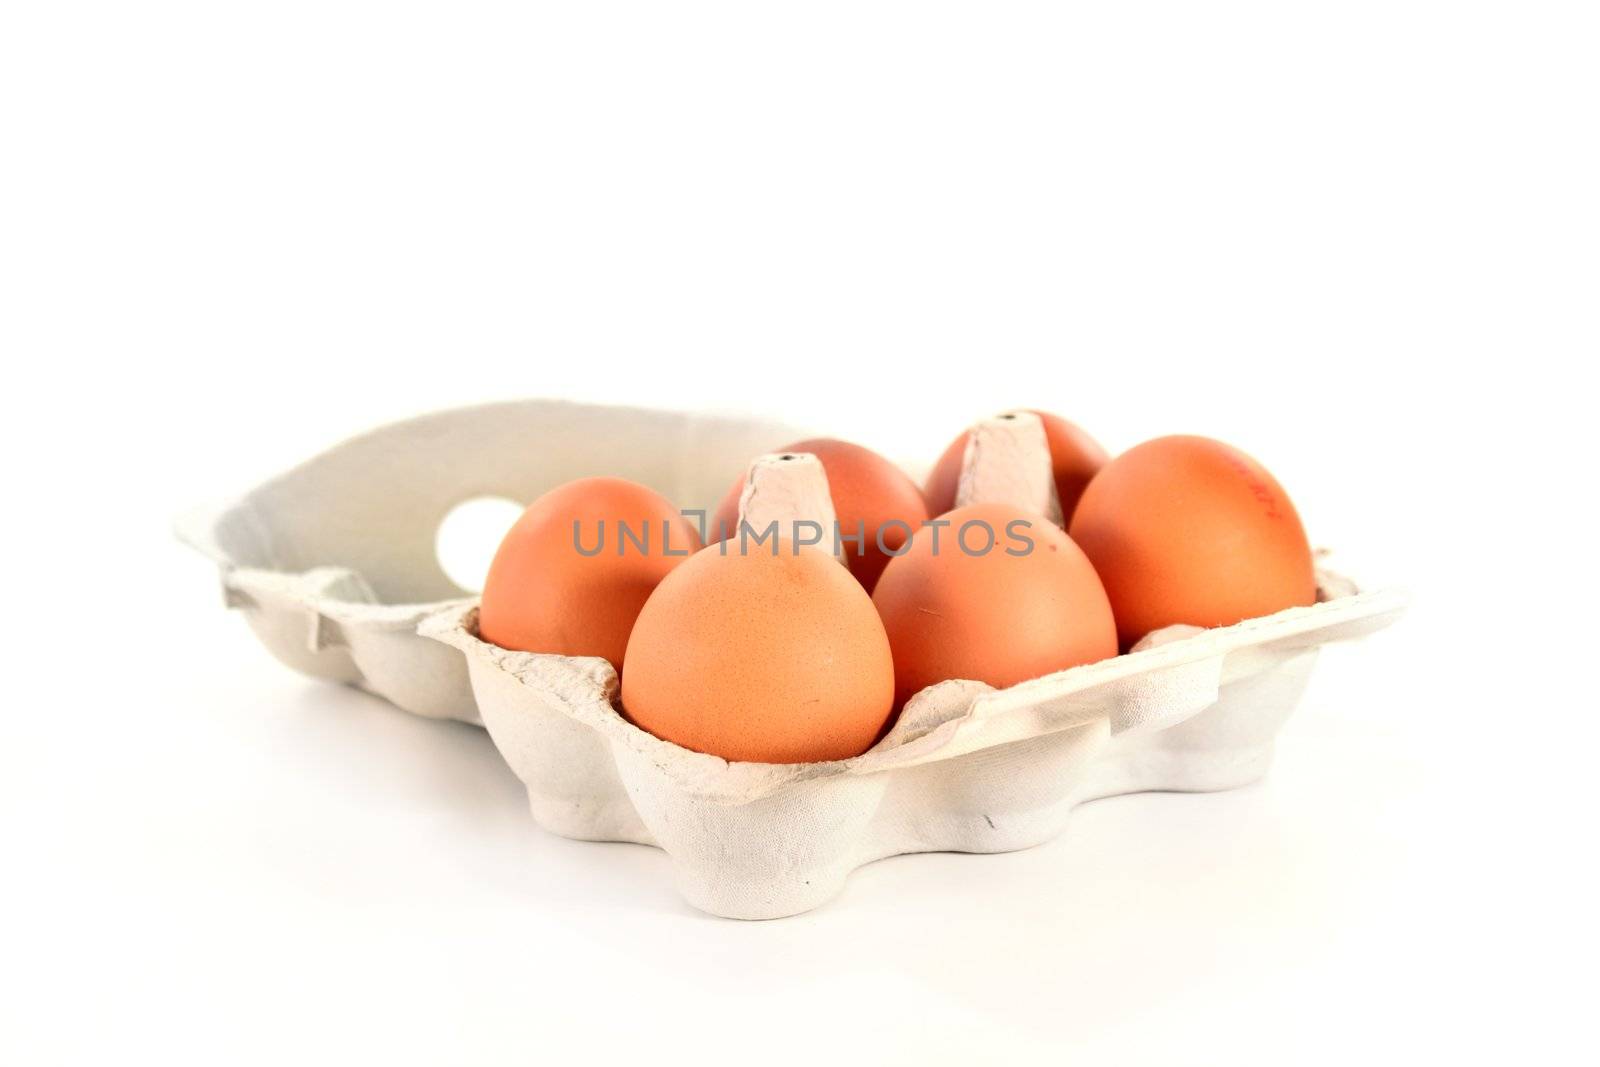 six eggs in an egg carton on a white background
